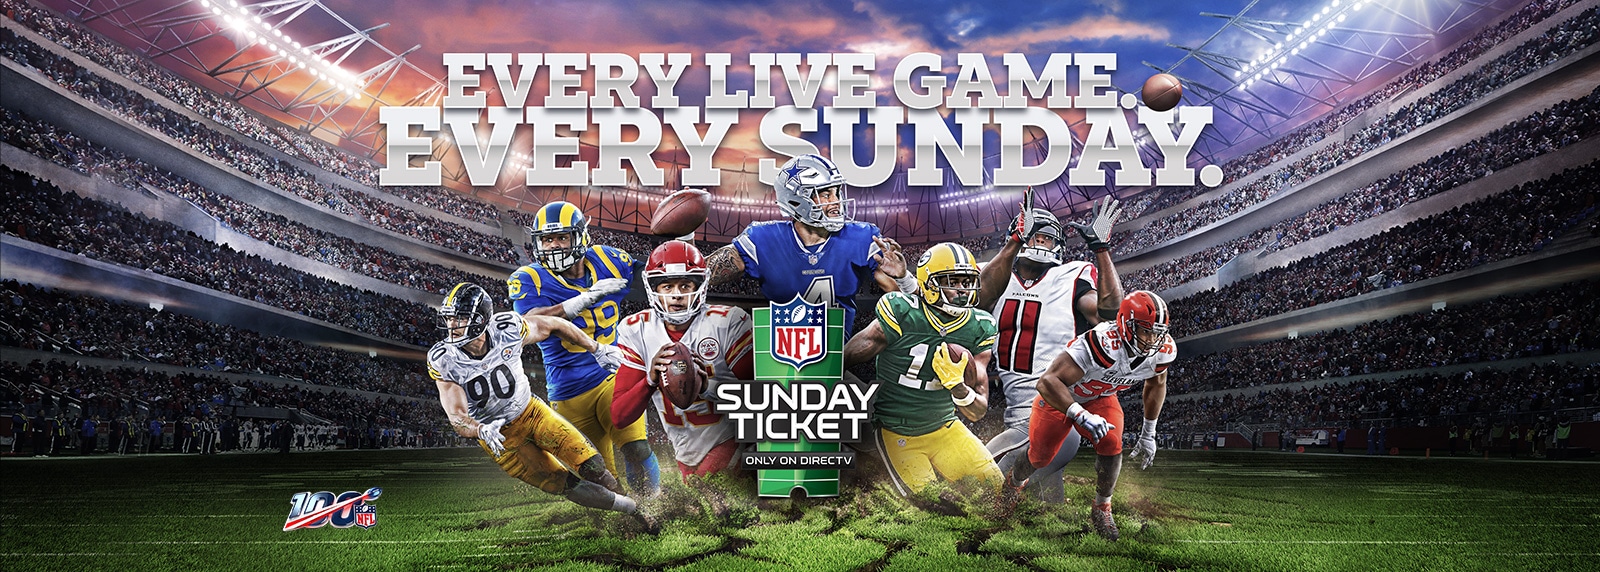 Watch NFL SUNDAY TICKET™ at Monk McGinn’s Bar in NYC